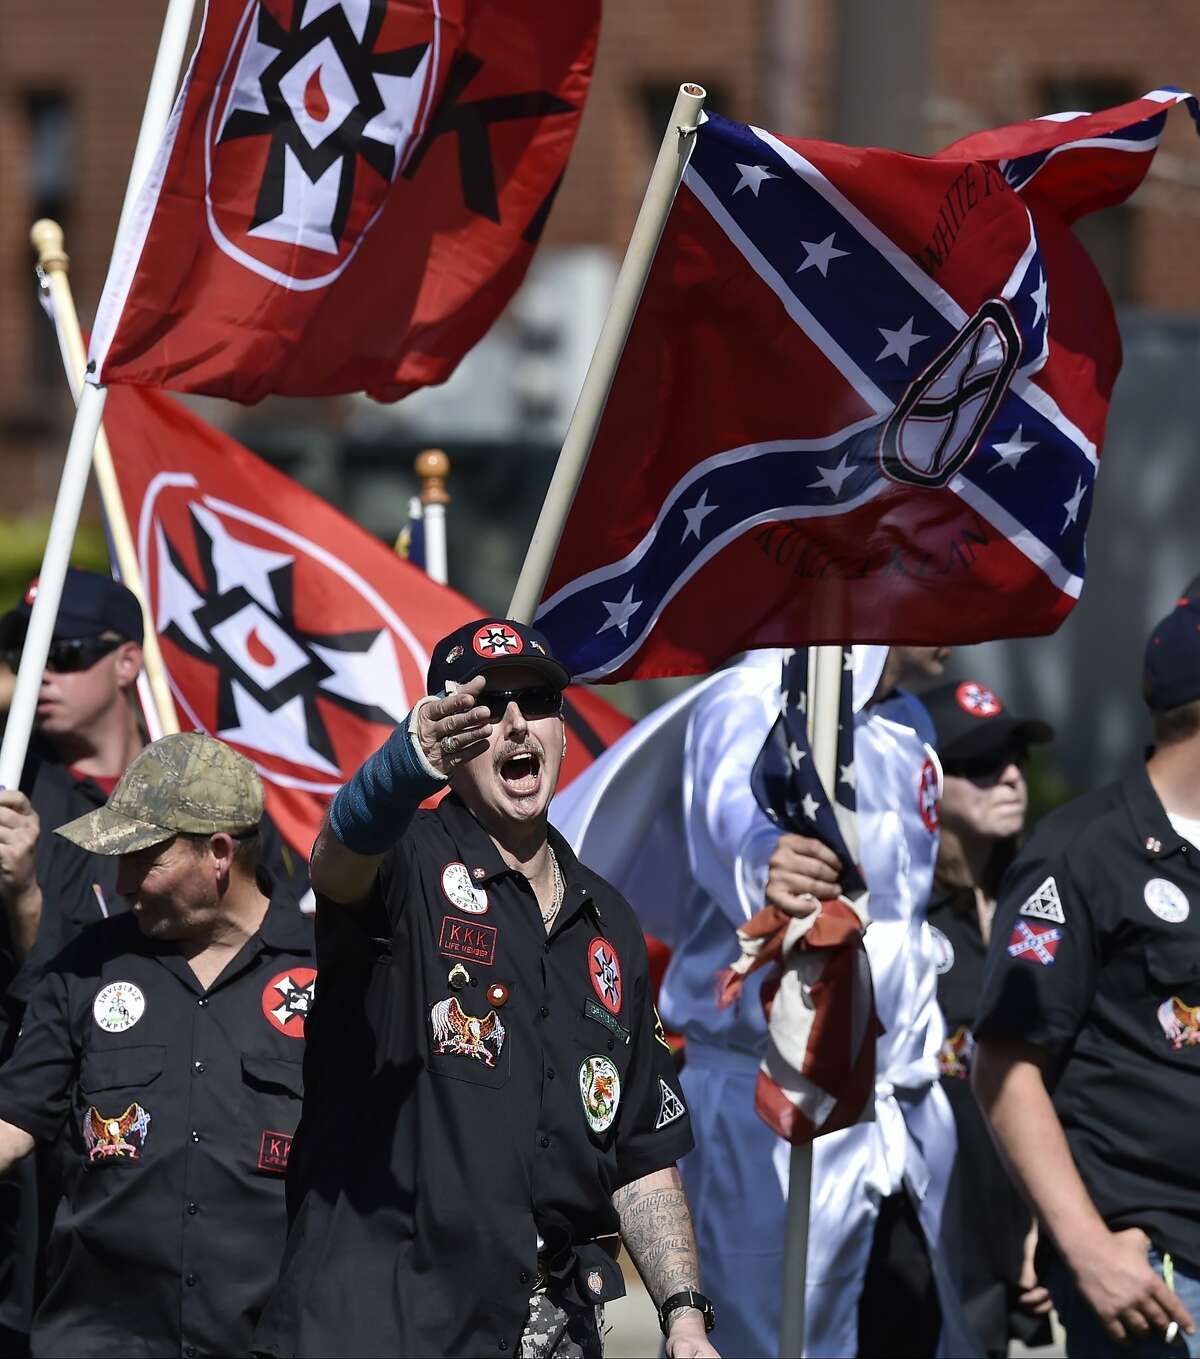 In this Saturday, April 23, 2016 photo, Loyal White Knights Grand Dragon Will Quigg of Anaheim, Calif., center, shouts to protestors during a "White Pride," rally, in Rome, Ga. The name "Ku Klux Klan" evokes horror for many, but what is the organization today? The AP is interviewing imperial wizards and grand dragons, a watchdog group and others to develop a portrait of the KKK as it exists in 2016. (AP Photo/Mike Stewart)